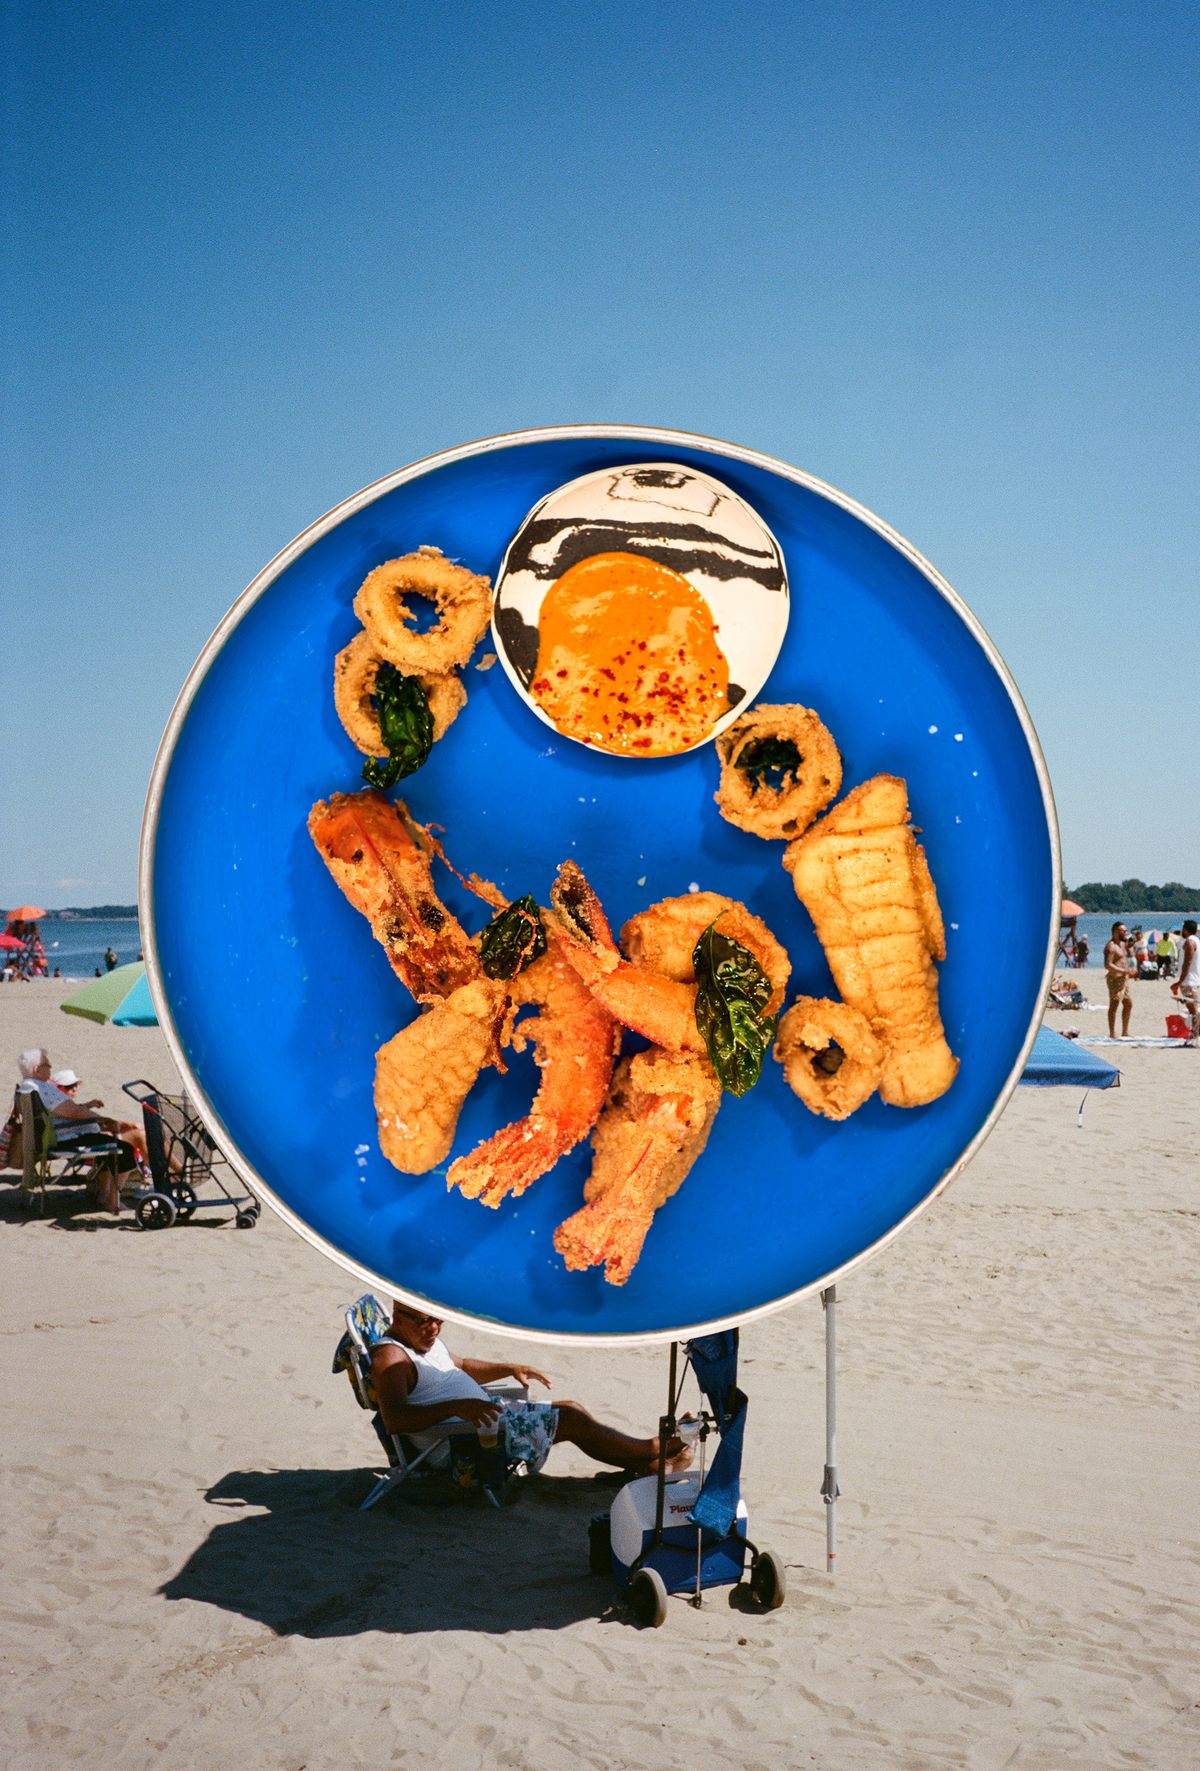 "Seafood City," buttermilk-and-semolina-fried seafood with romesco sauce, is Ghetto Gastro's ode to City Island's beachside restaurants.